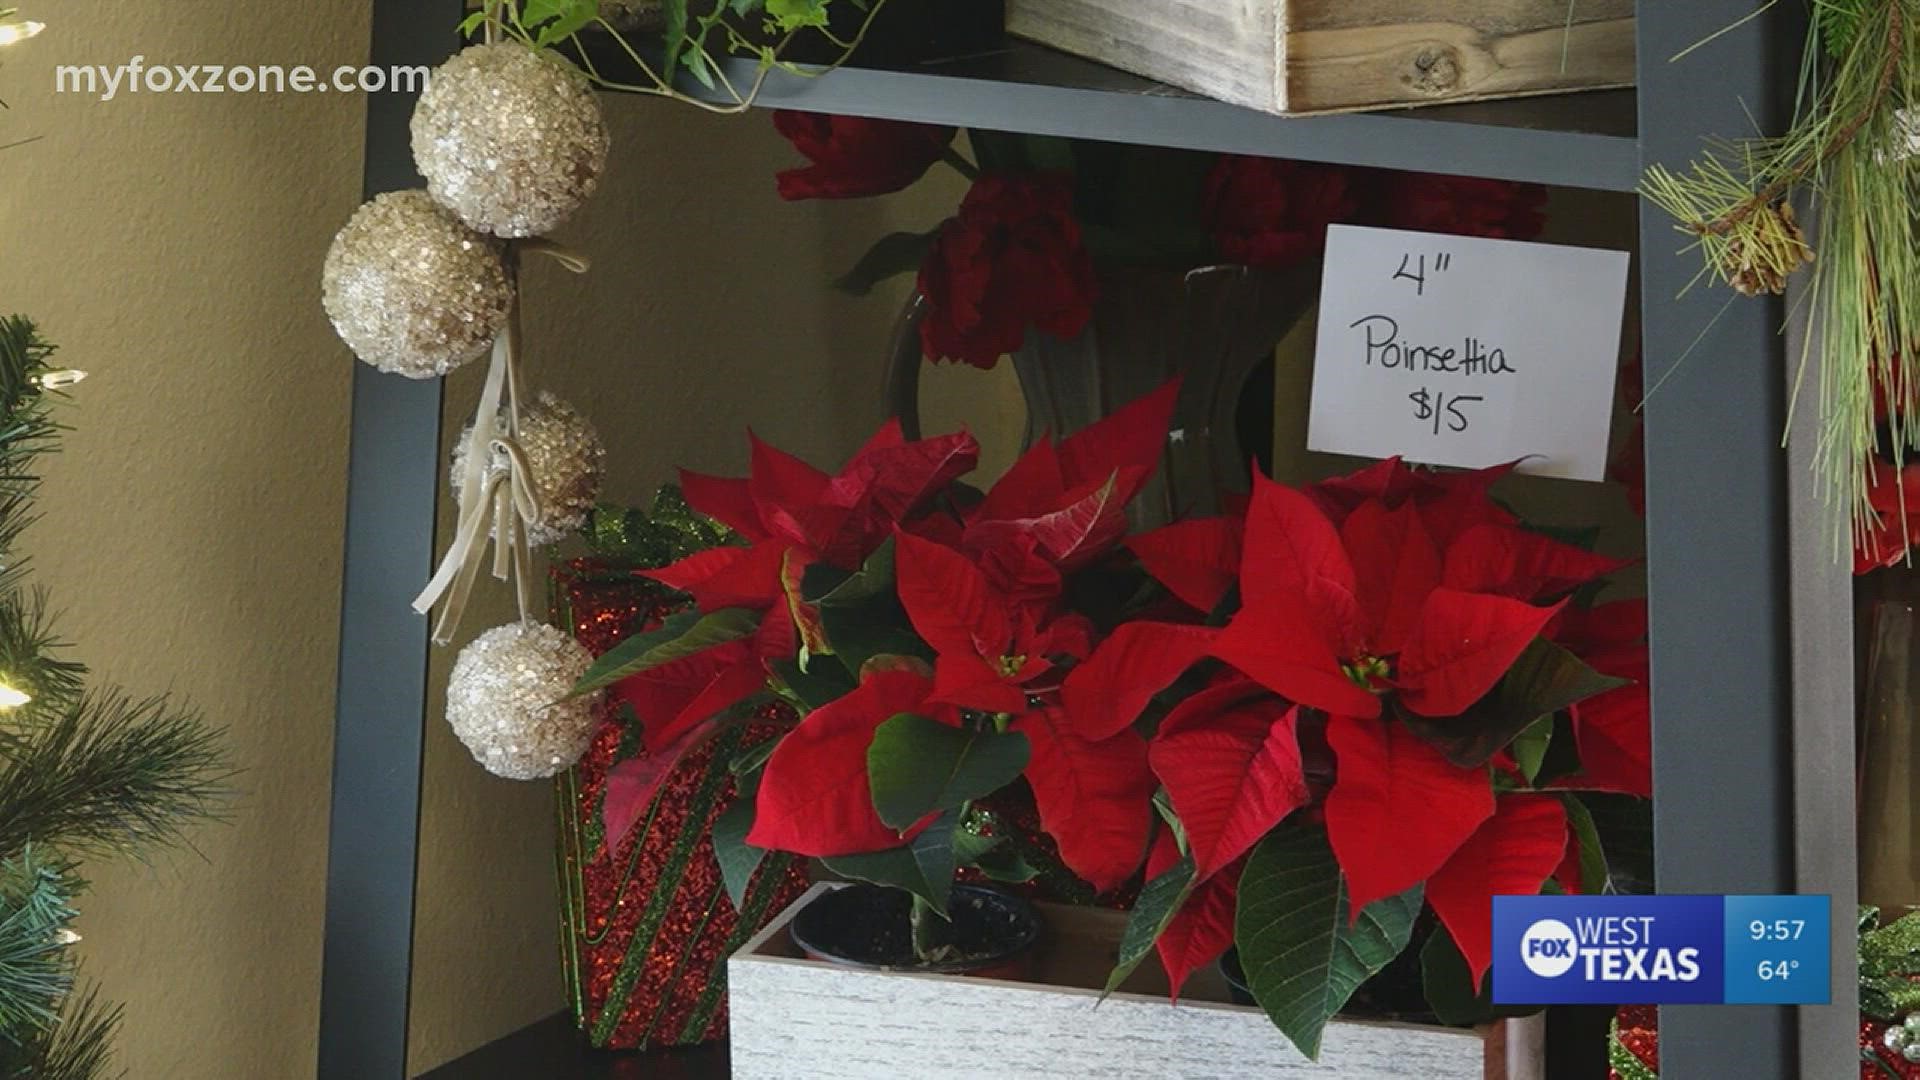 Poinsettias are native to Mexico. A San Angelo  florist explains the history behind the evergreen plant.